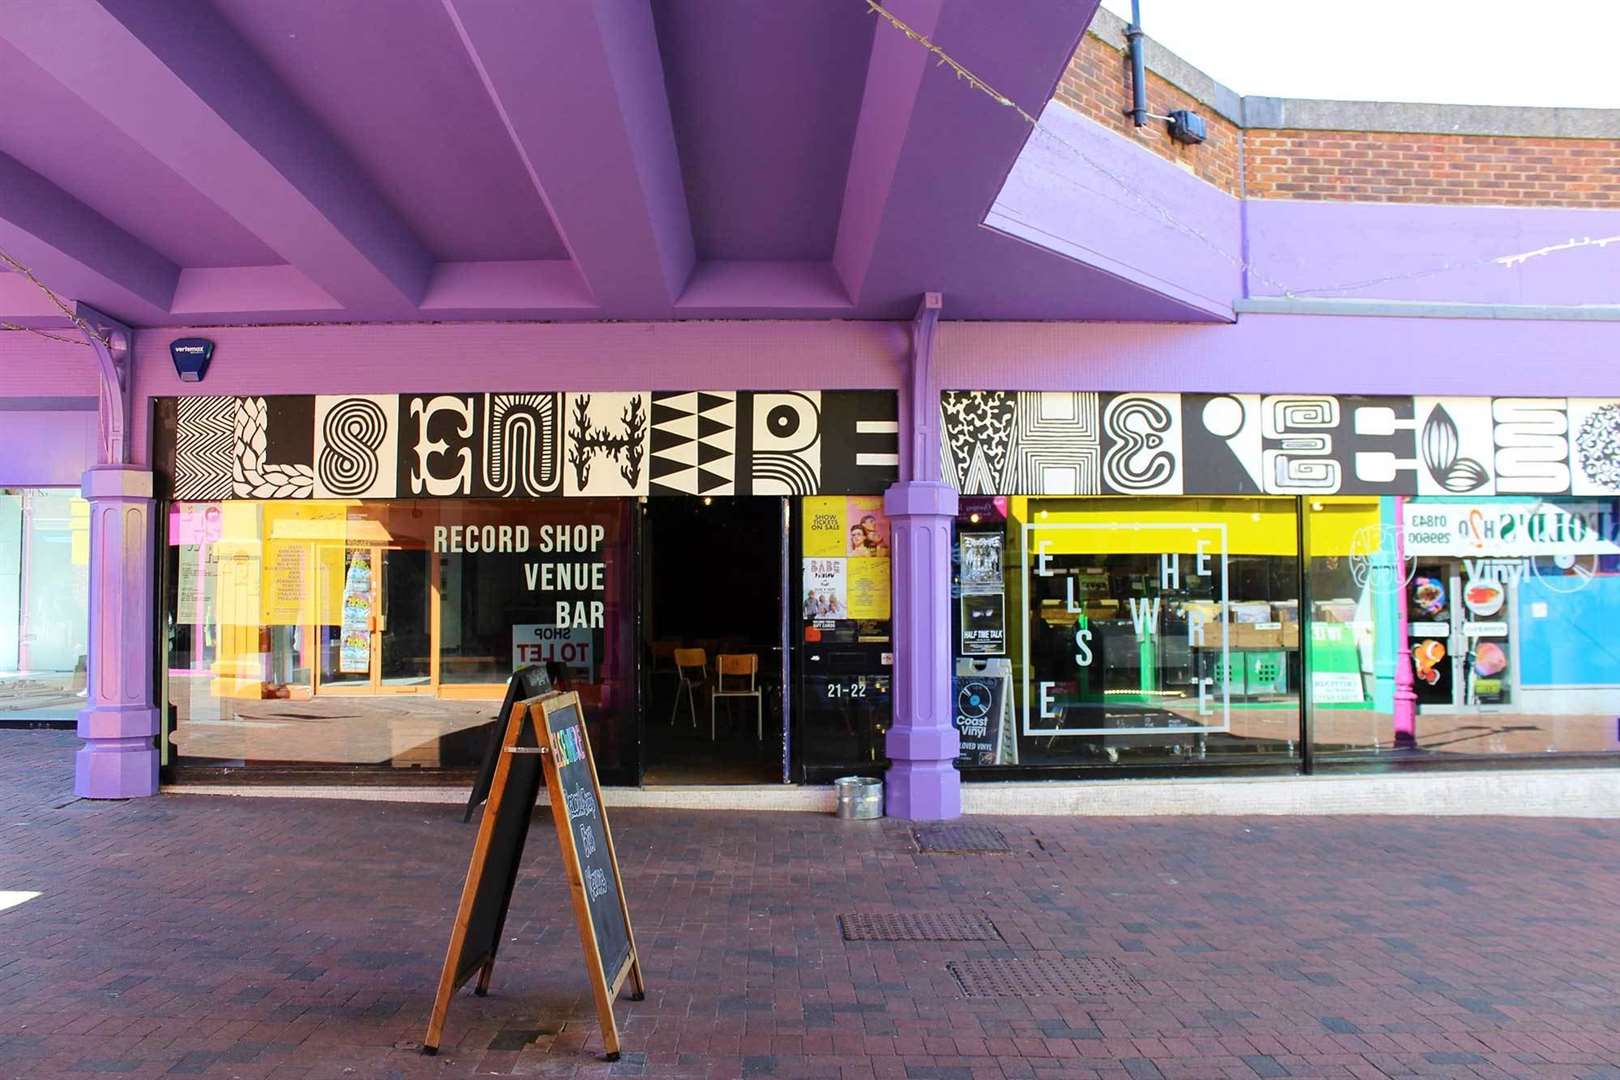 Record store, cafe and live music venue Elsewhere has played a big part in pulling in footfall